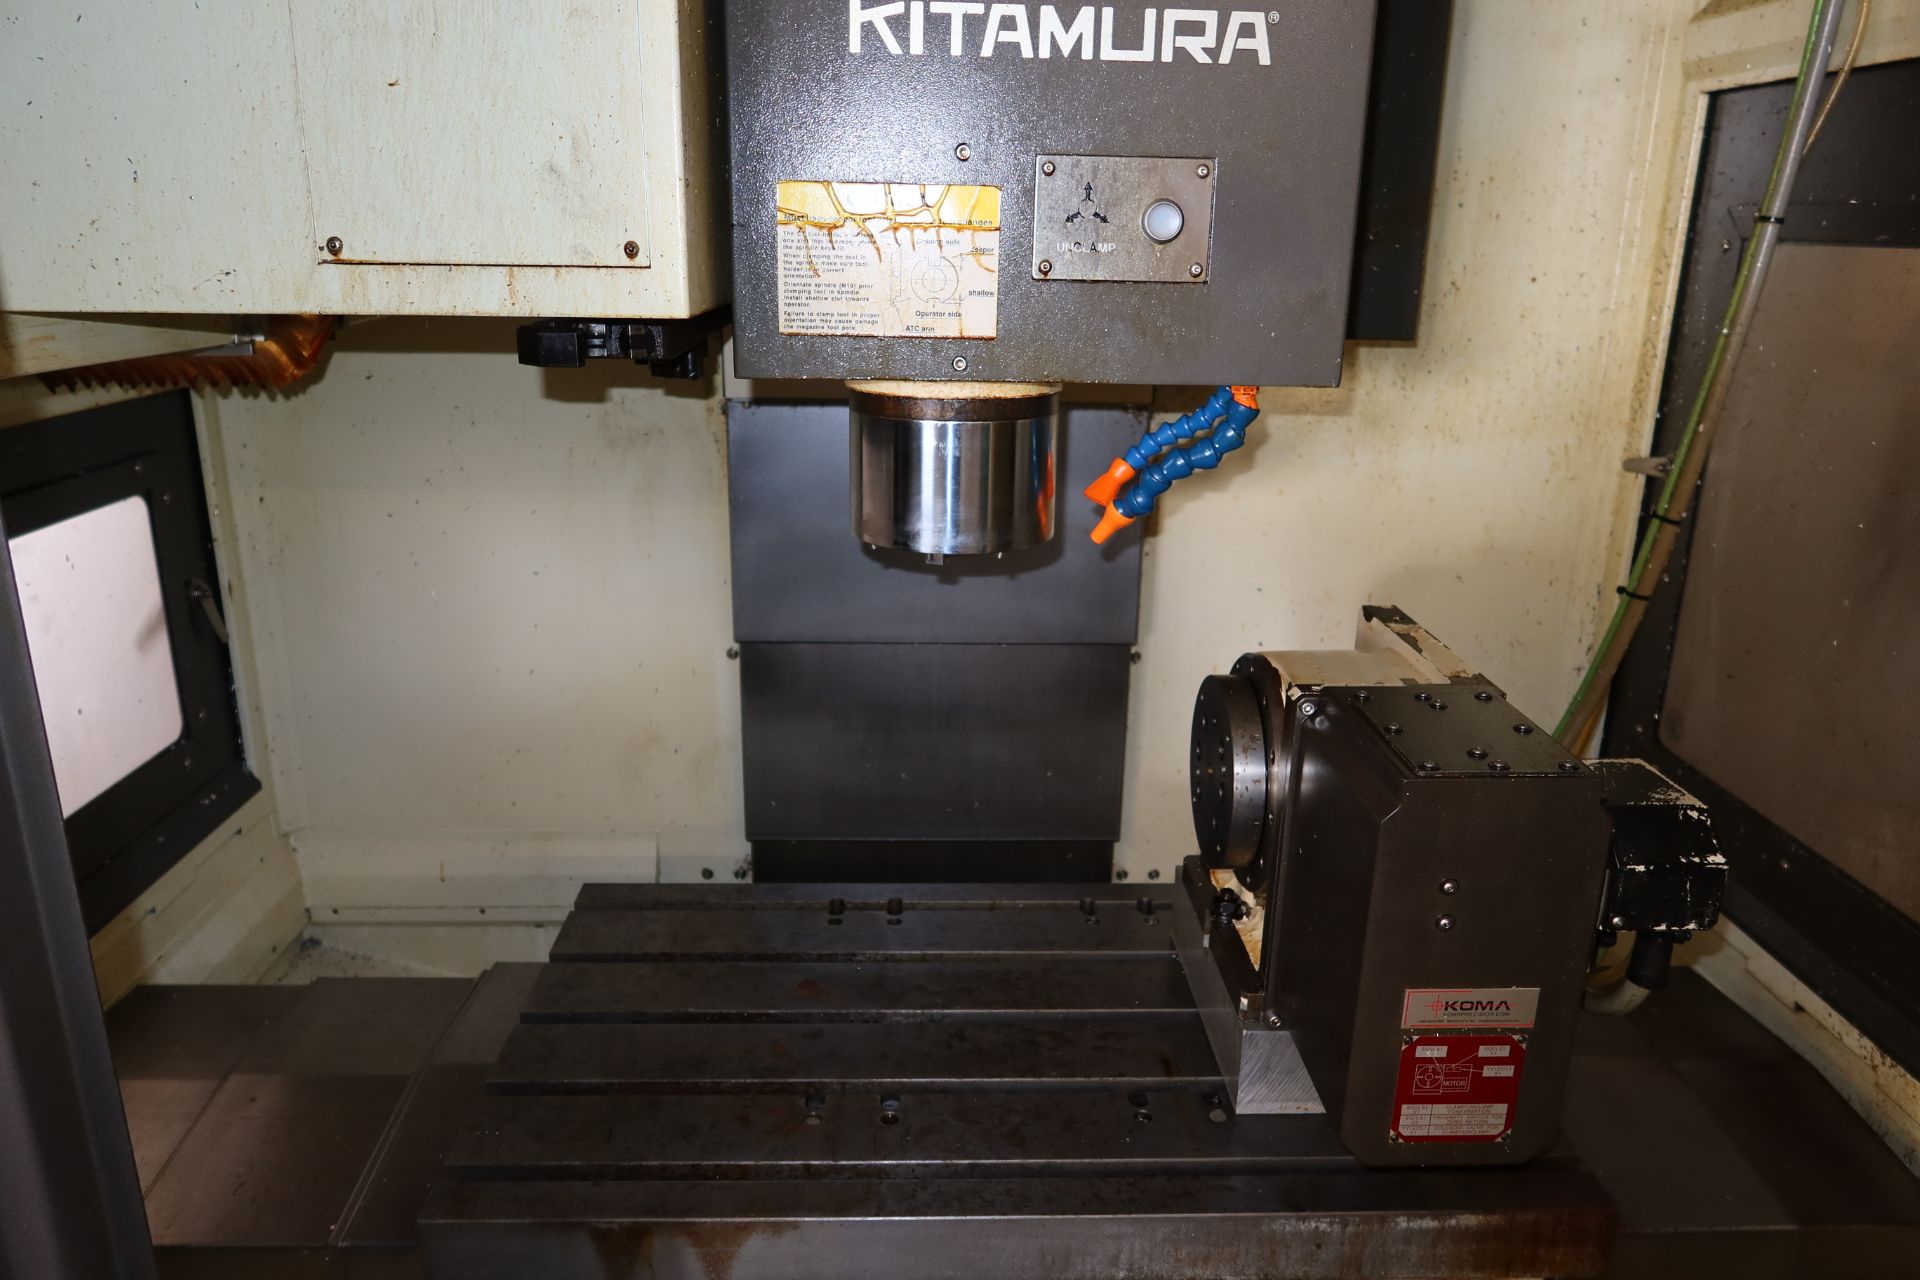 2015 KITAMURA MYCENTER 3XD CNC VERTICAL MACHINING CENTER W/KOMA 4TH AXIS, 12000 RPM SPINDLE, 24-TOOL - Image 3 of 6